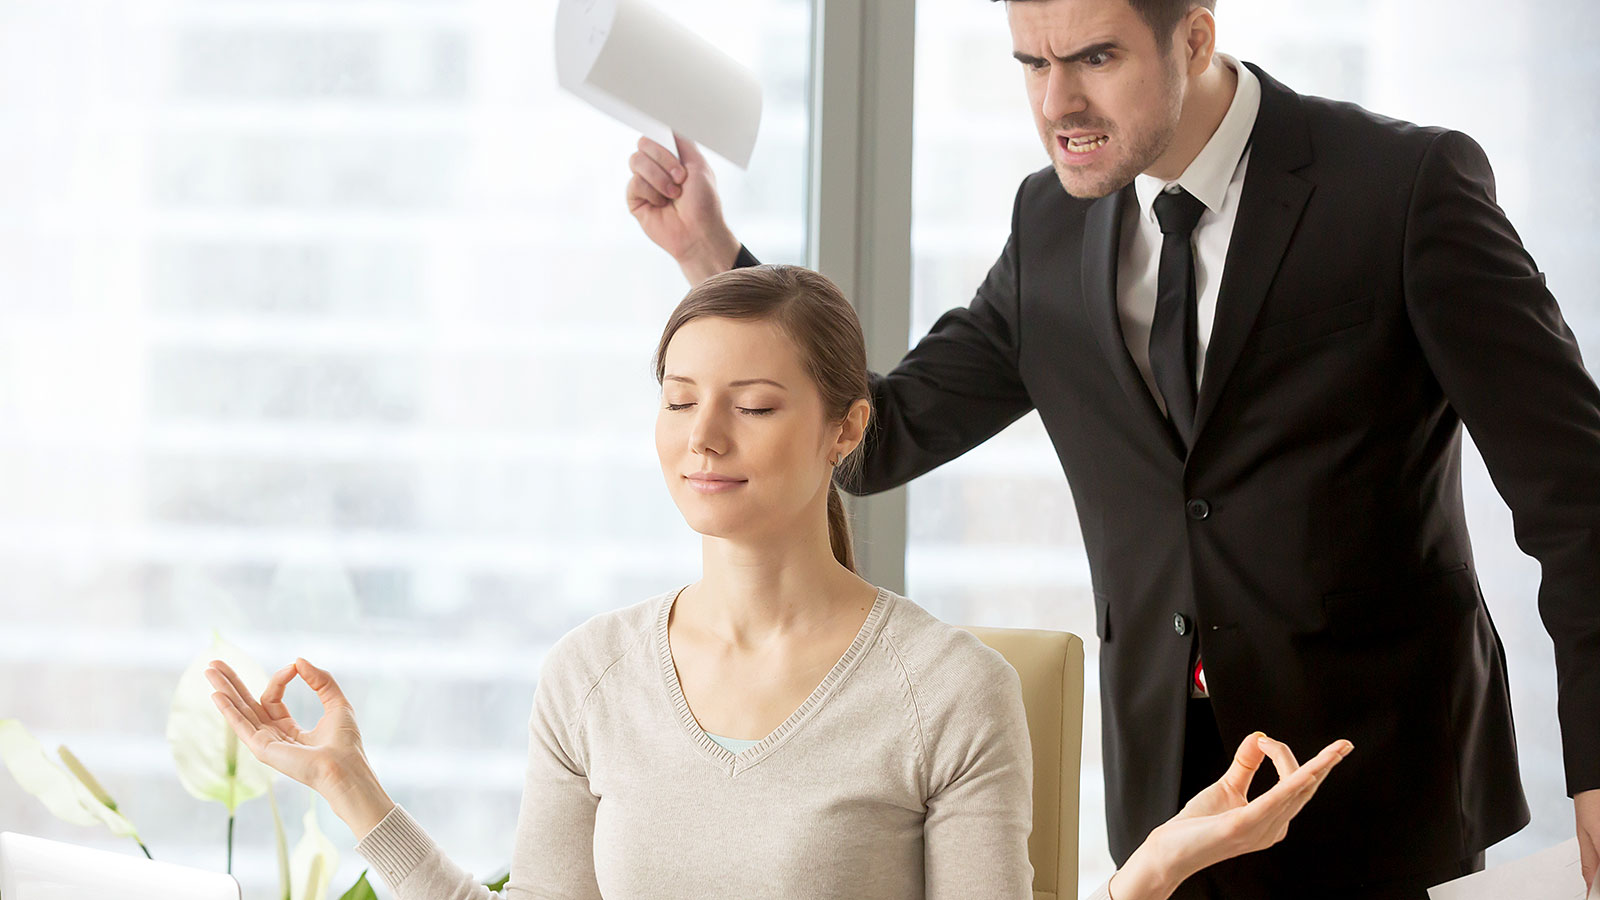 How Much of a Team Player Are You? angry office work coworker colleague calm zen peaceful